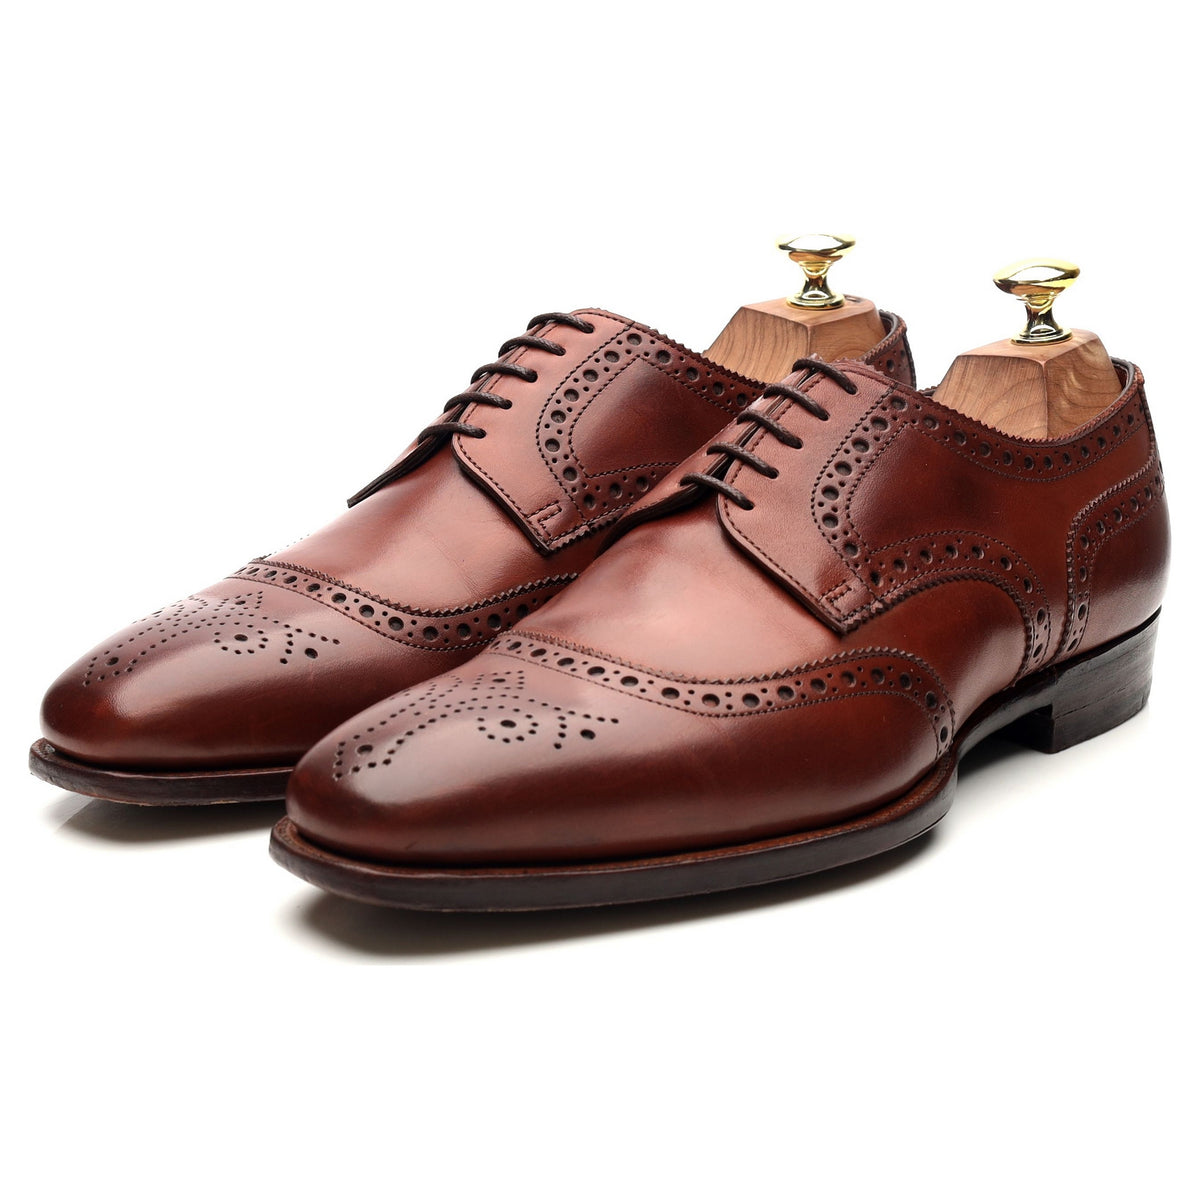 Wildsmith &#39;Covent&#39; Tan Brown Leather Derby Brogues UK 7 F